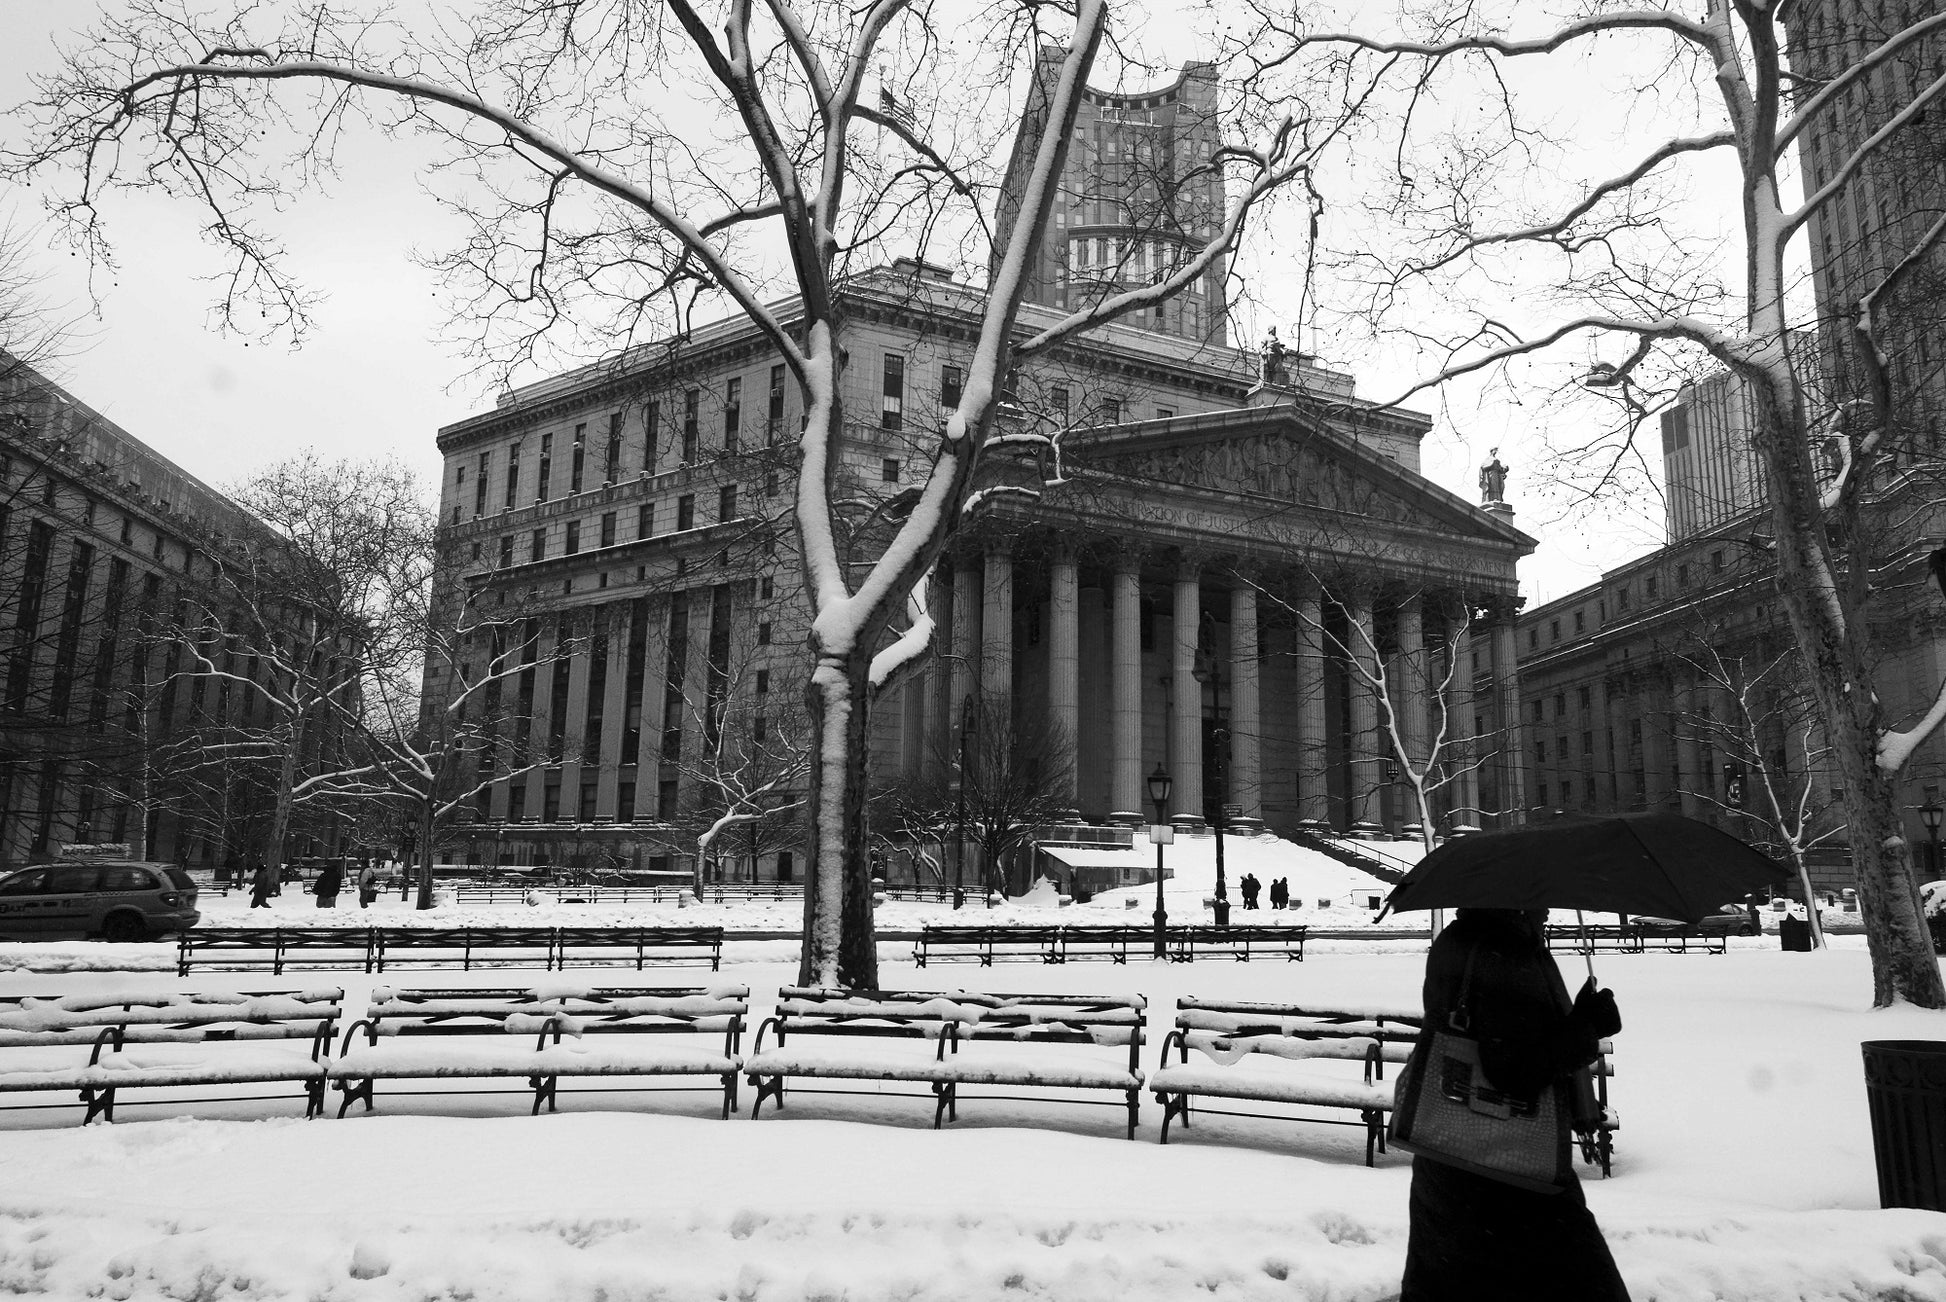 Alessandra Mattanza | DARKNESS, County Courthouse Building, New York. The County Courthouse is an imposing presence in this wintery photograph. Available as a photographic print on acrylic glass.